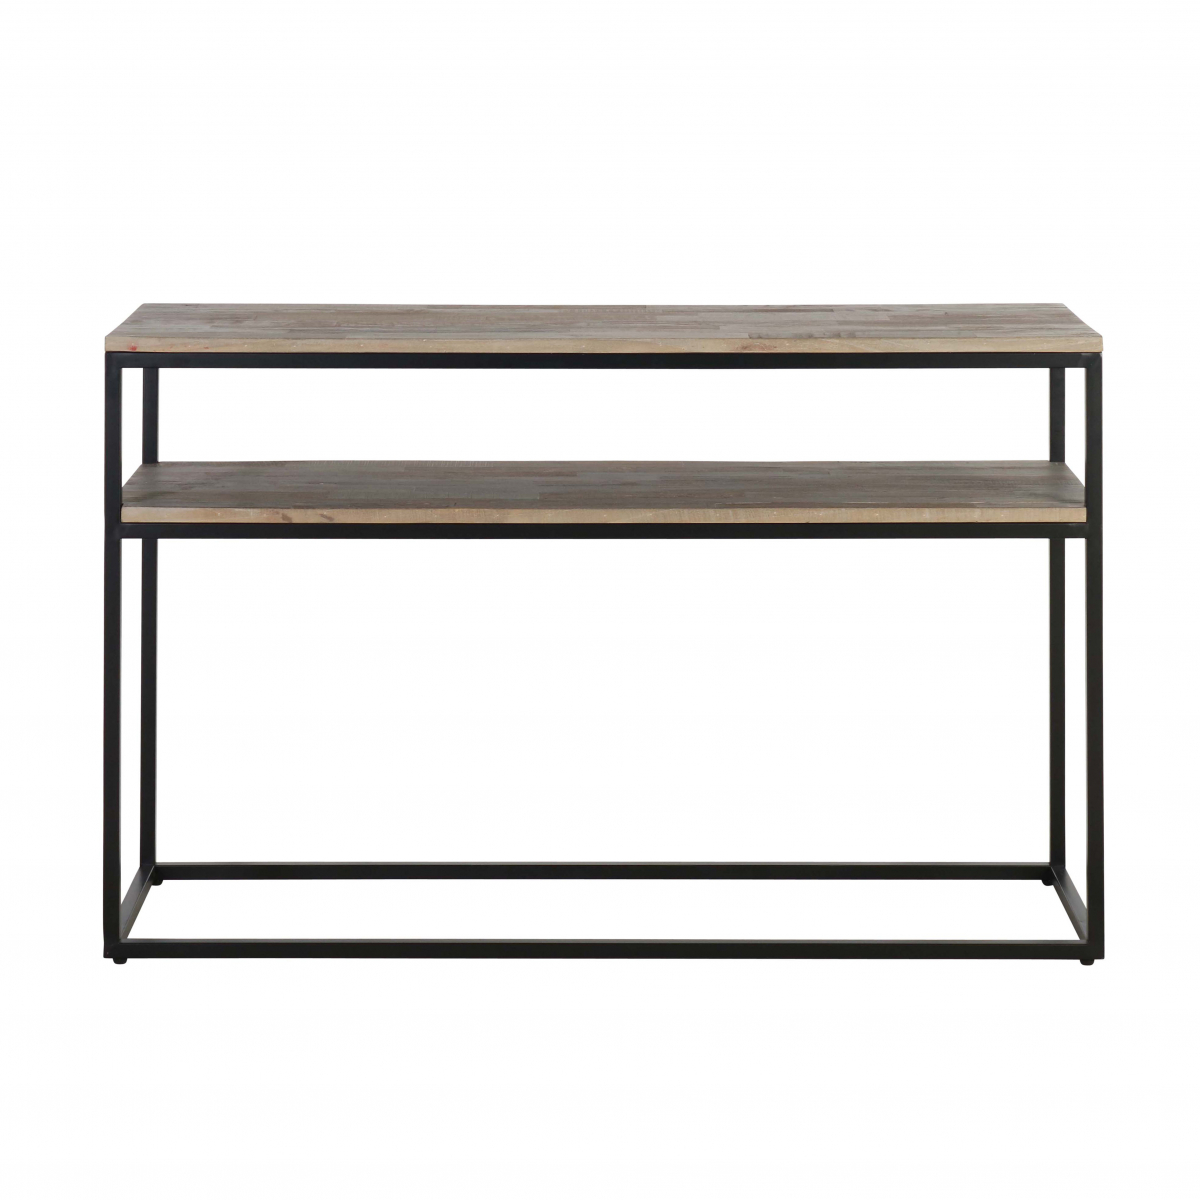 Wood and metal 2 tier console 